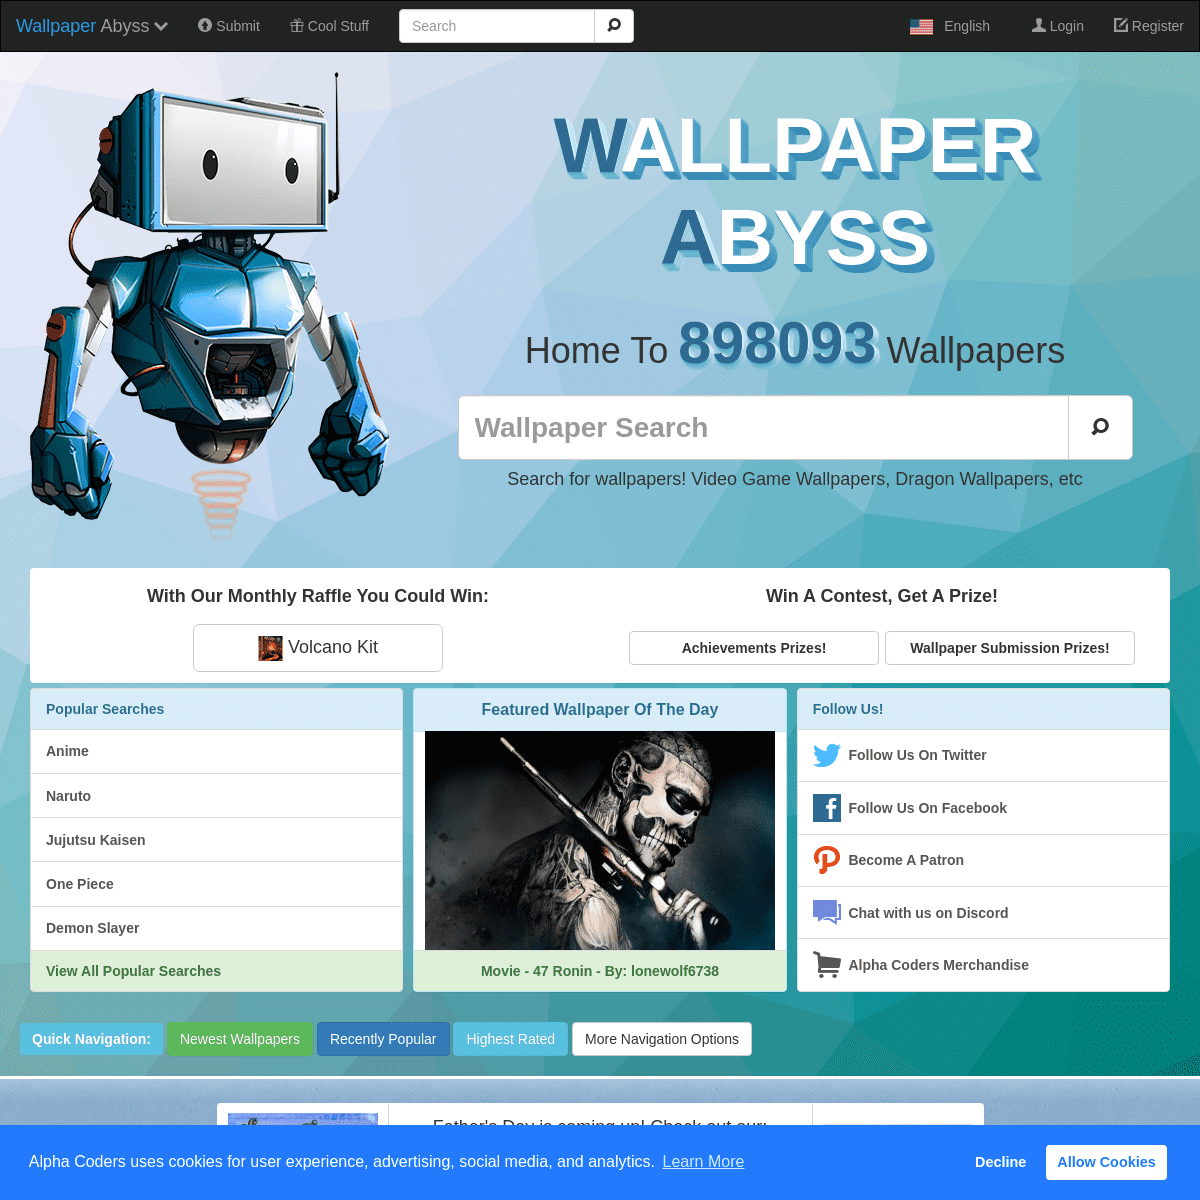 A complete backup of https://wall.alphacoders.com